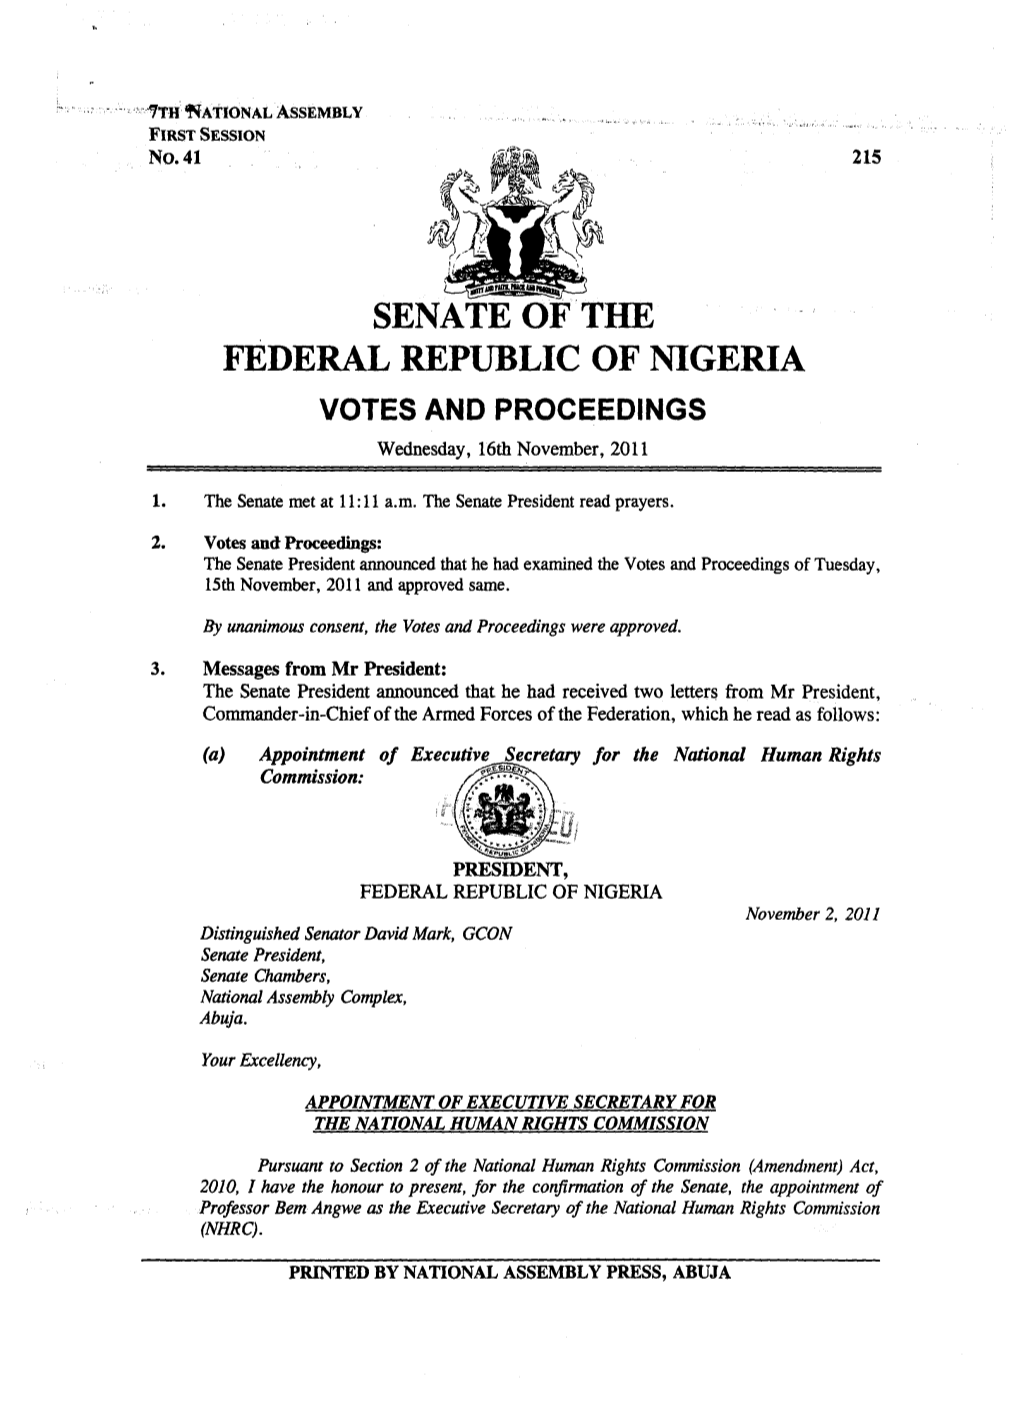 SENATE of the FEDERAL REPUBLIC of NIGERIA VOTES and PROCEEDINGS Wednesday, 16Th November, 2011